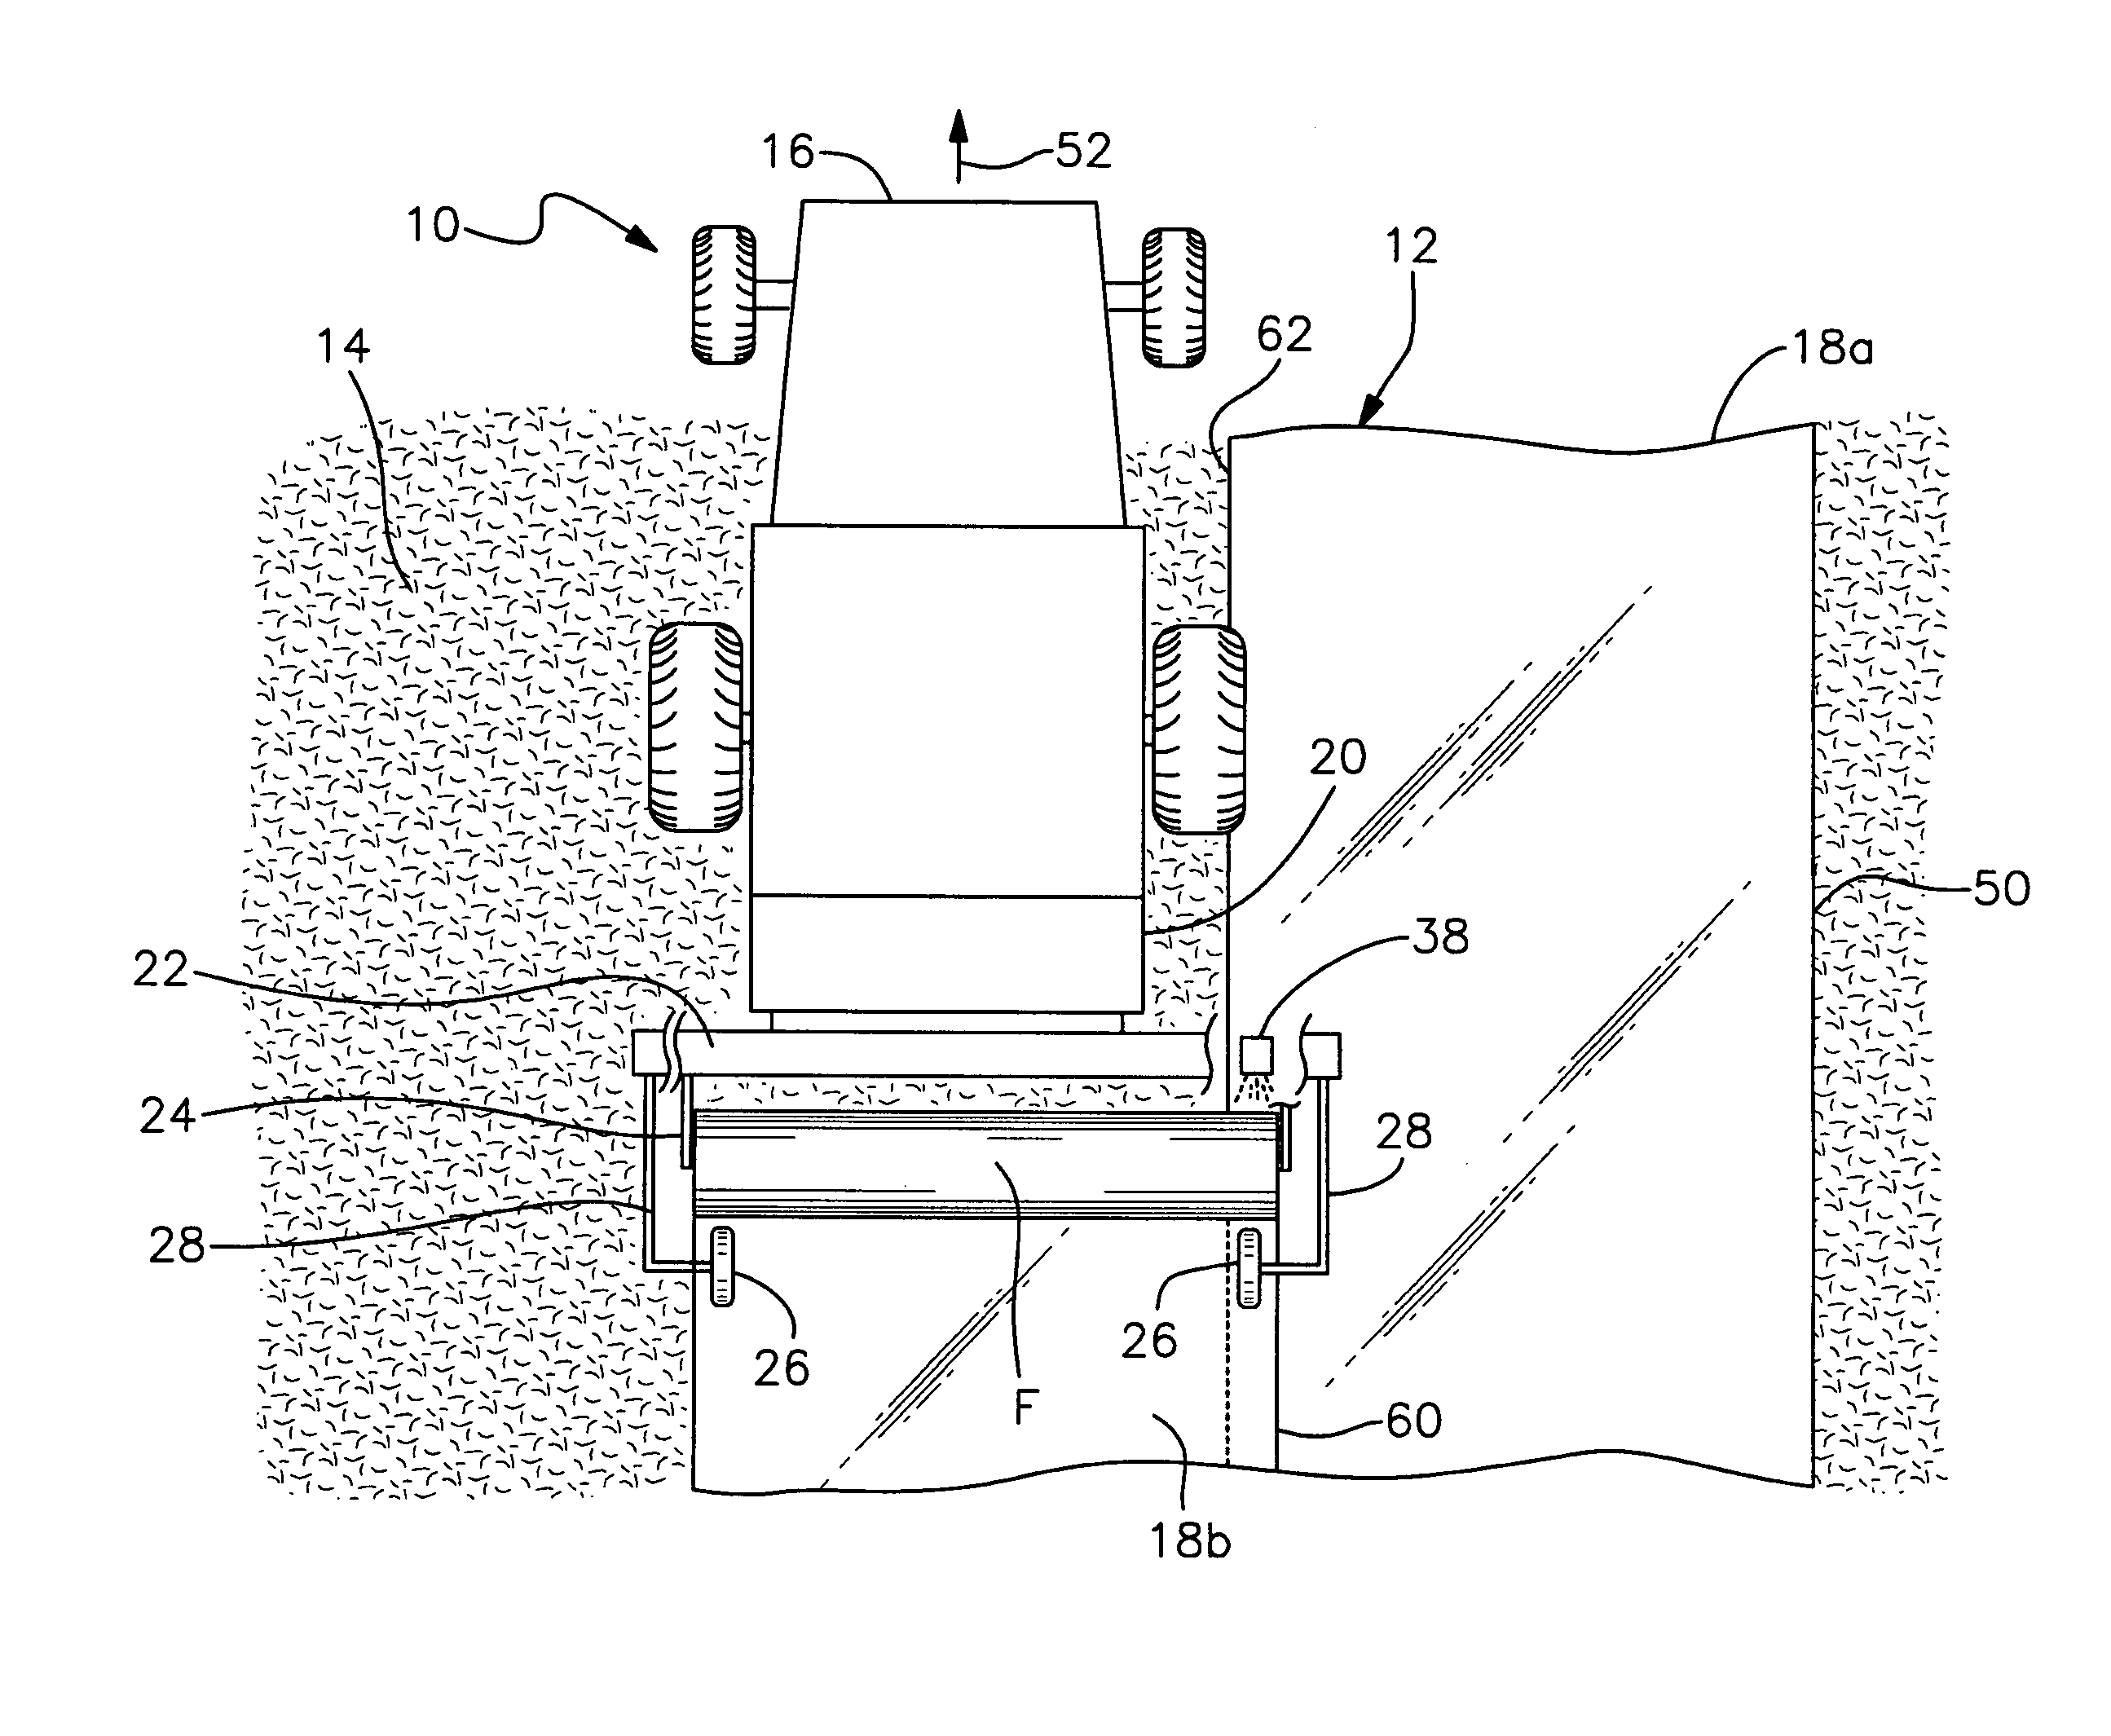 Melted hot glue system for applying broadcast soil fumigation film to an agricultural field